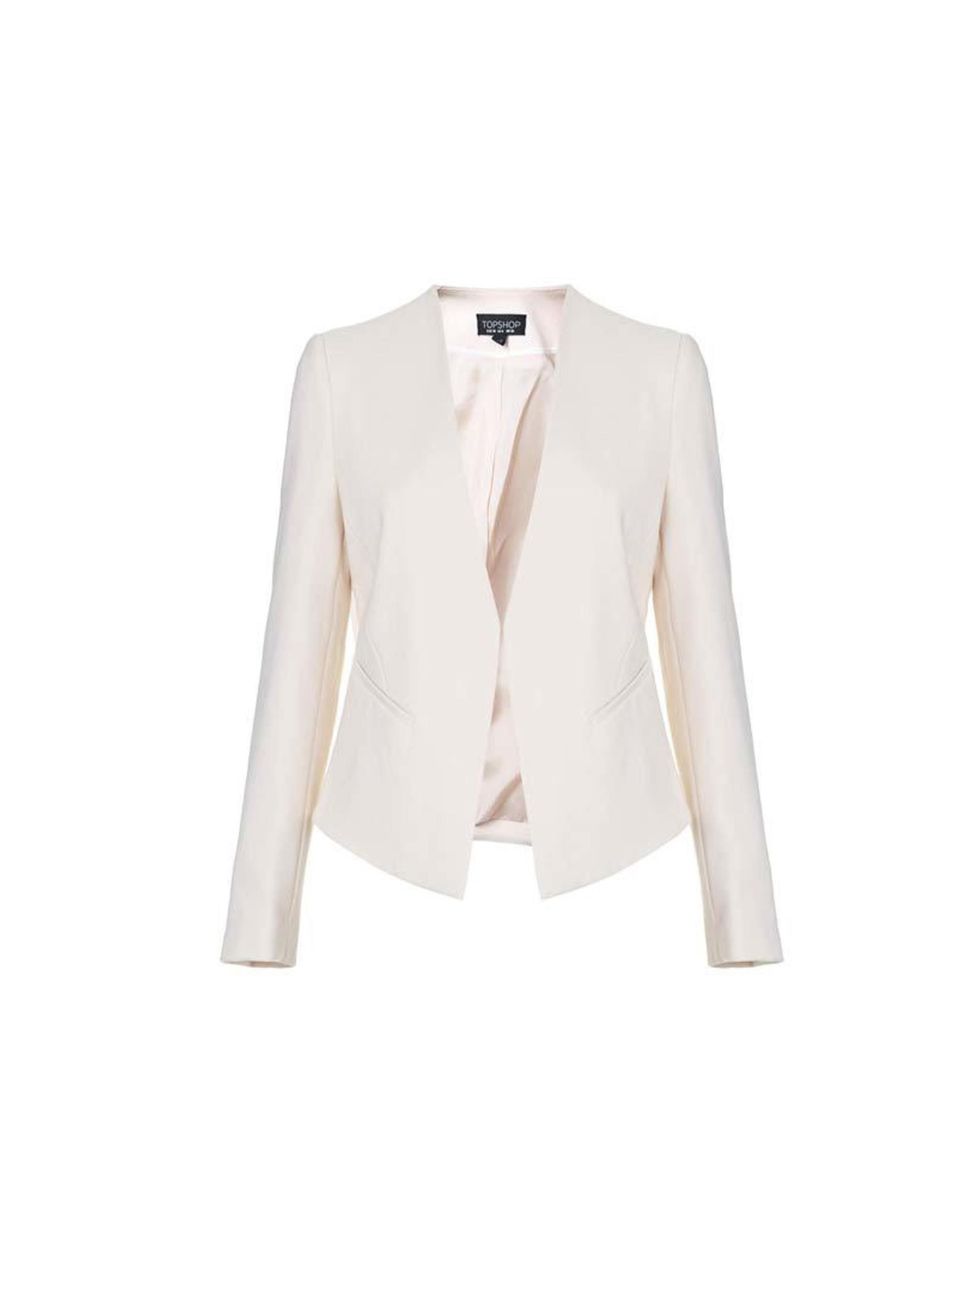 Add a white blazer for the summer nights

Topshop, £48